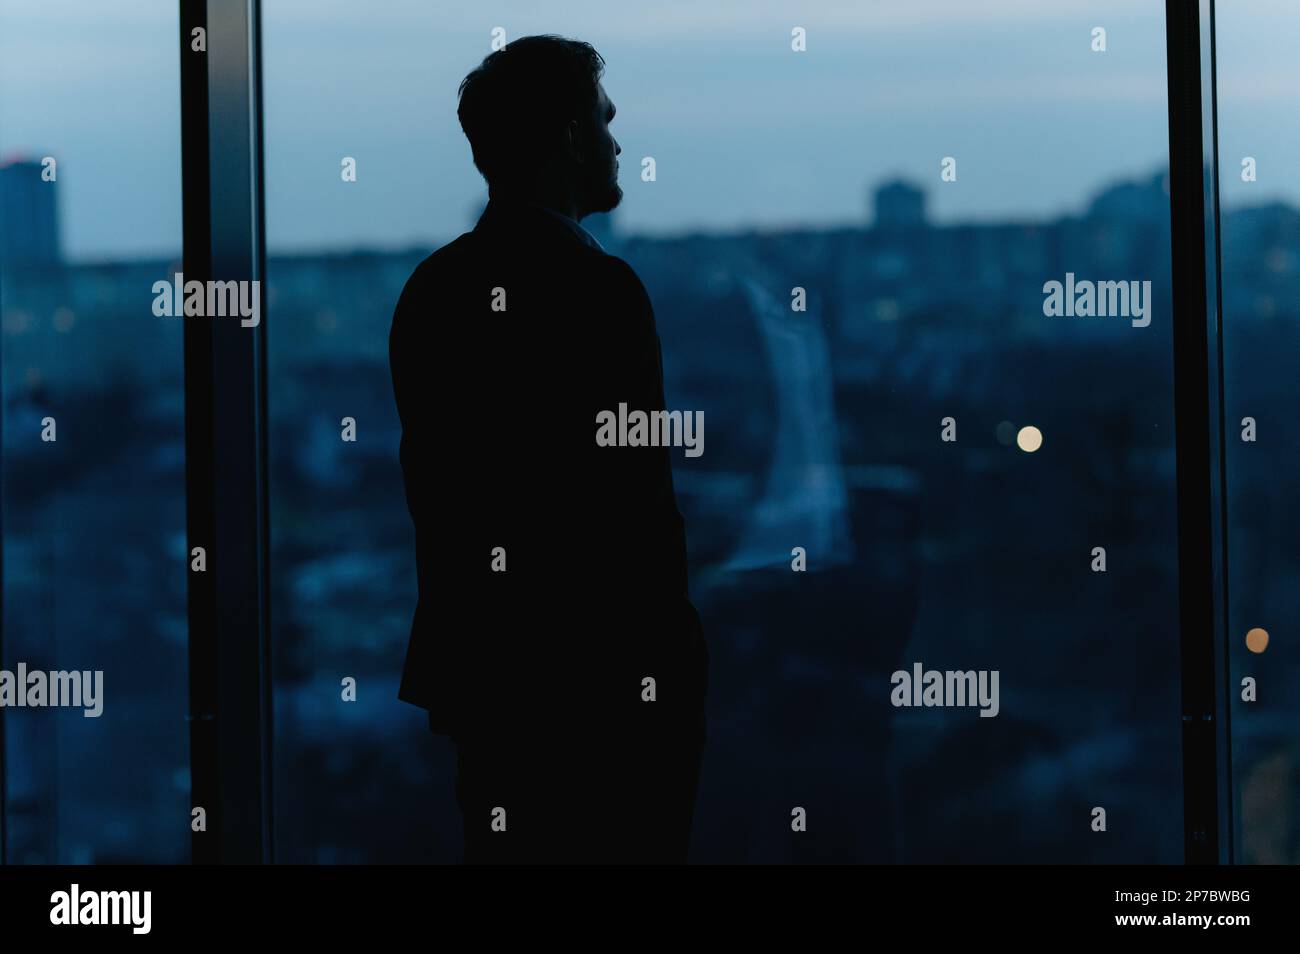 Silhouette of a Business Man looking out of high rise office window at night Stock Photo